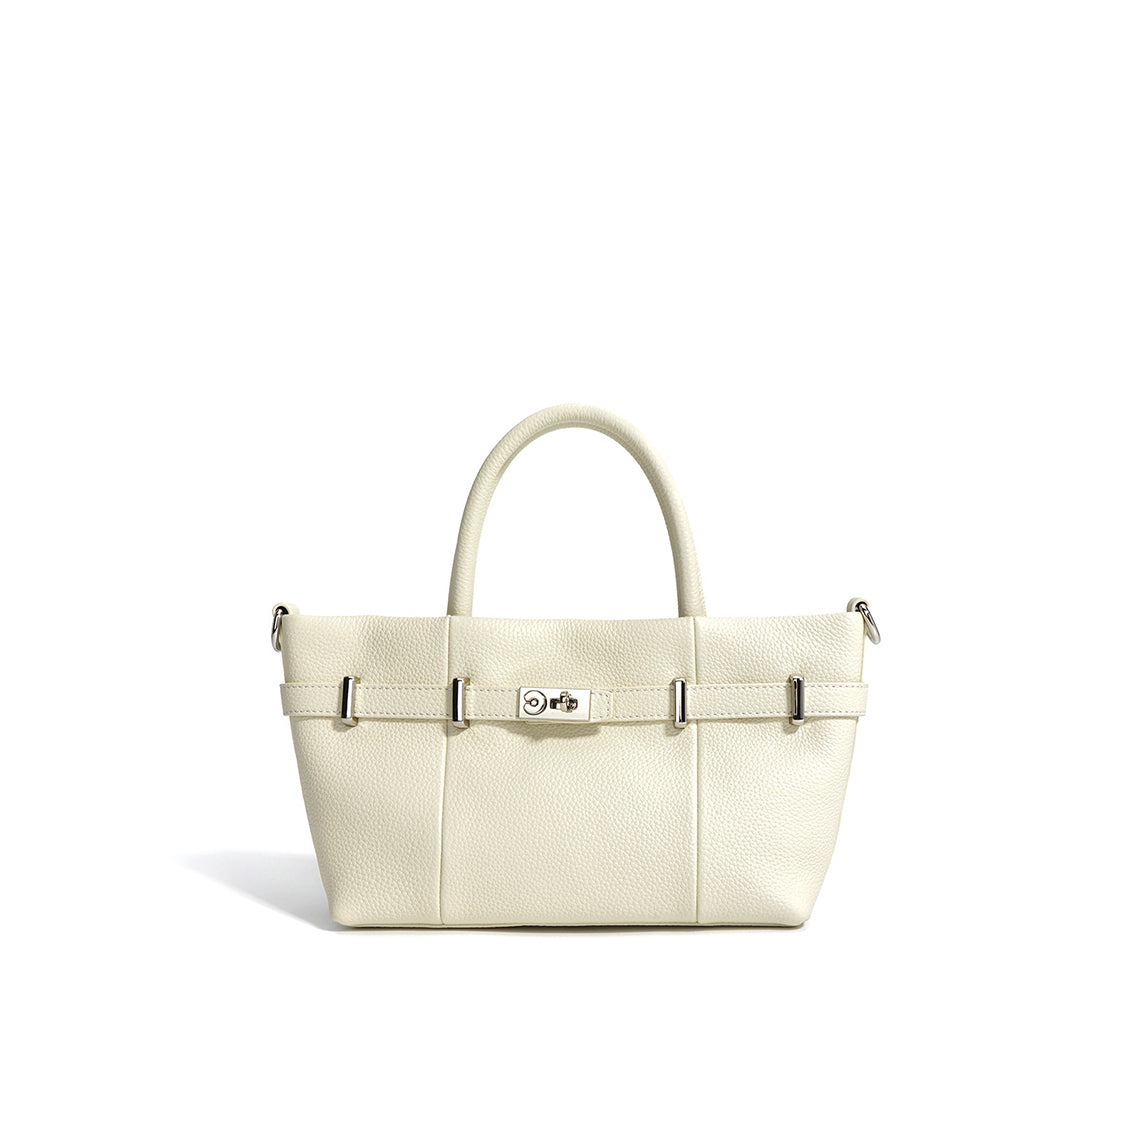 White Leather Bag for Women | Affordable Genuine Leather Bags